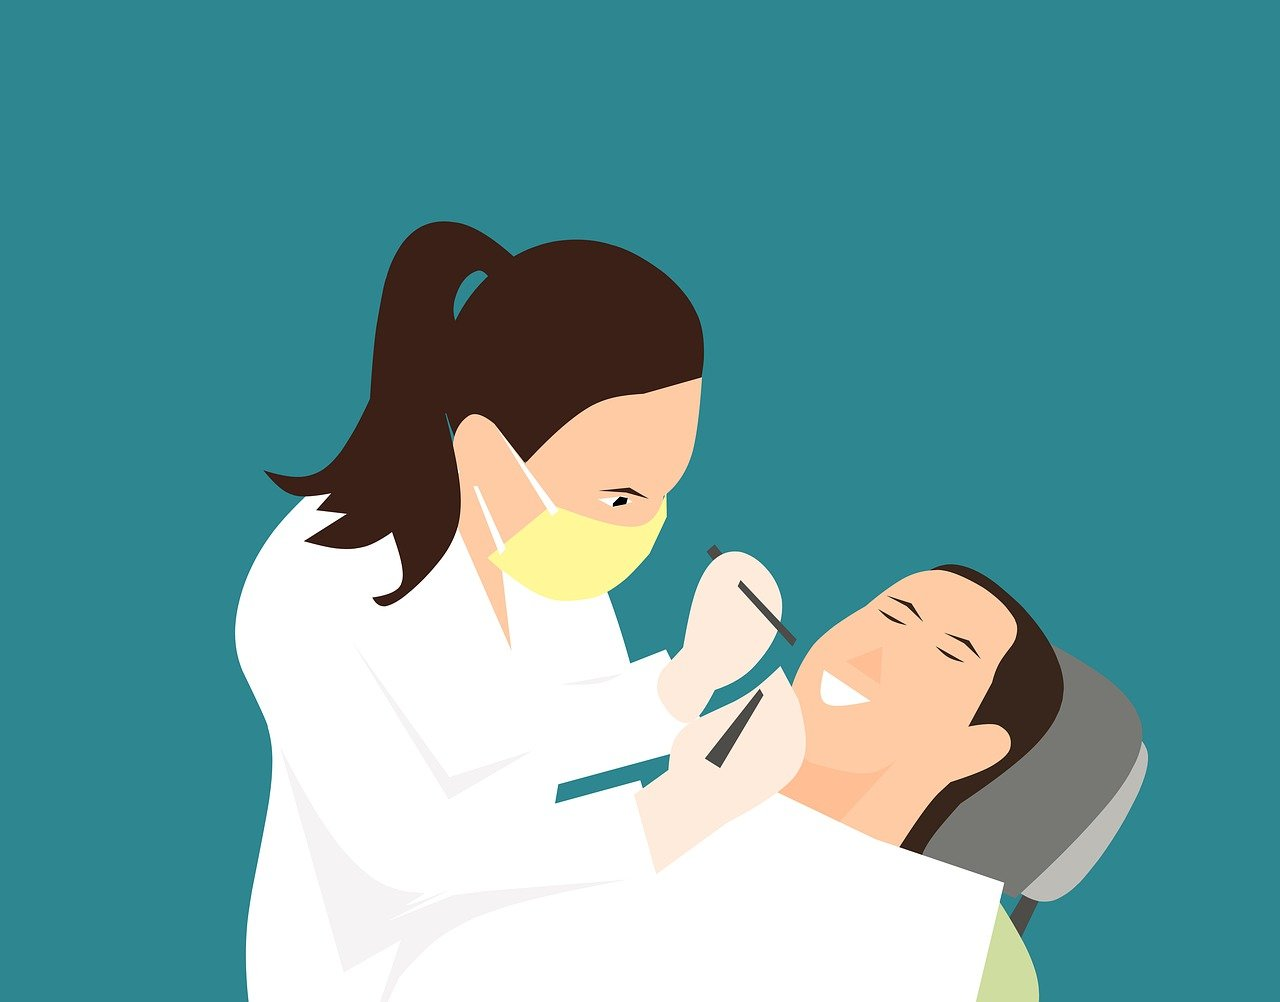 Dentist operating on a patient